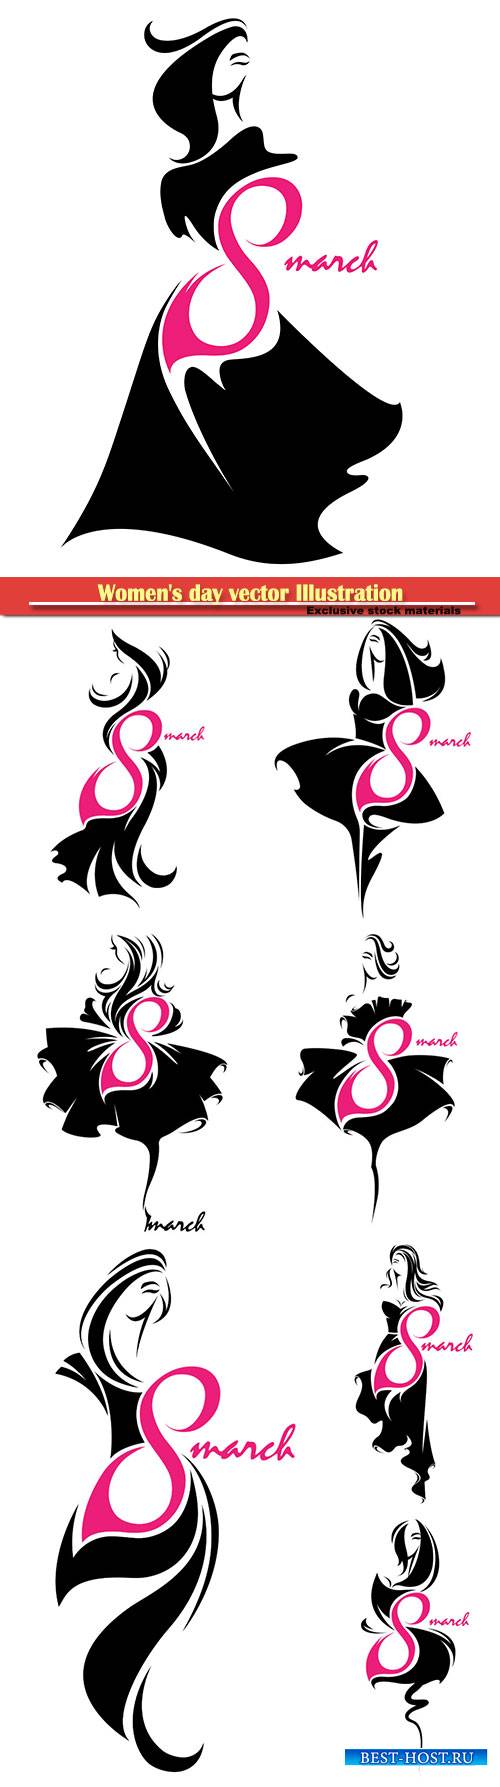 Women's day vector Illustration of women silhouette icon